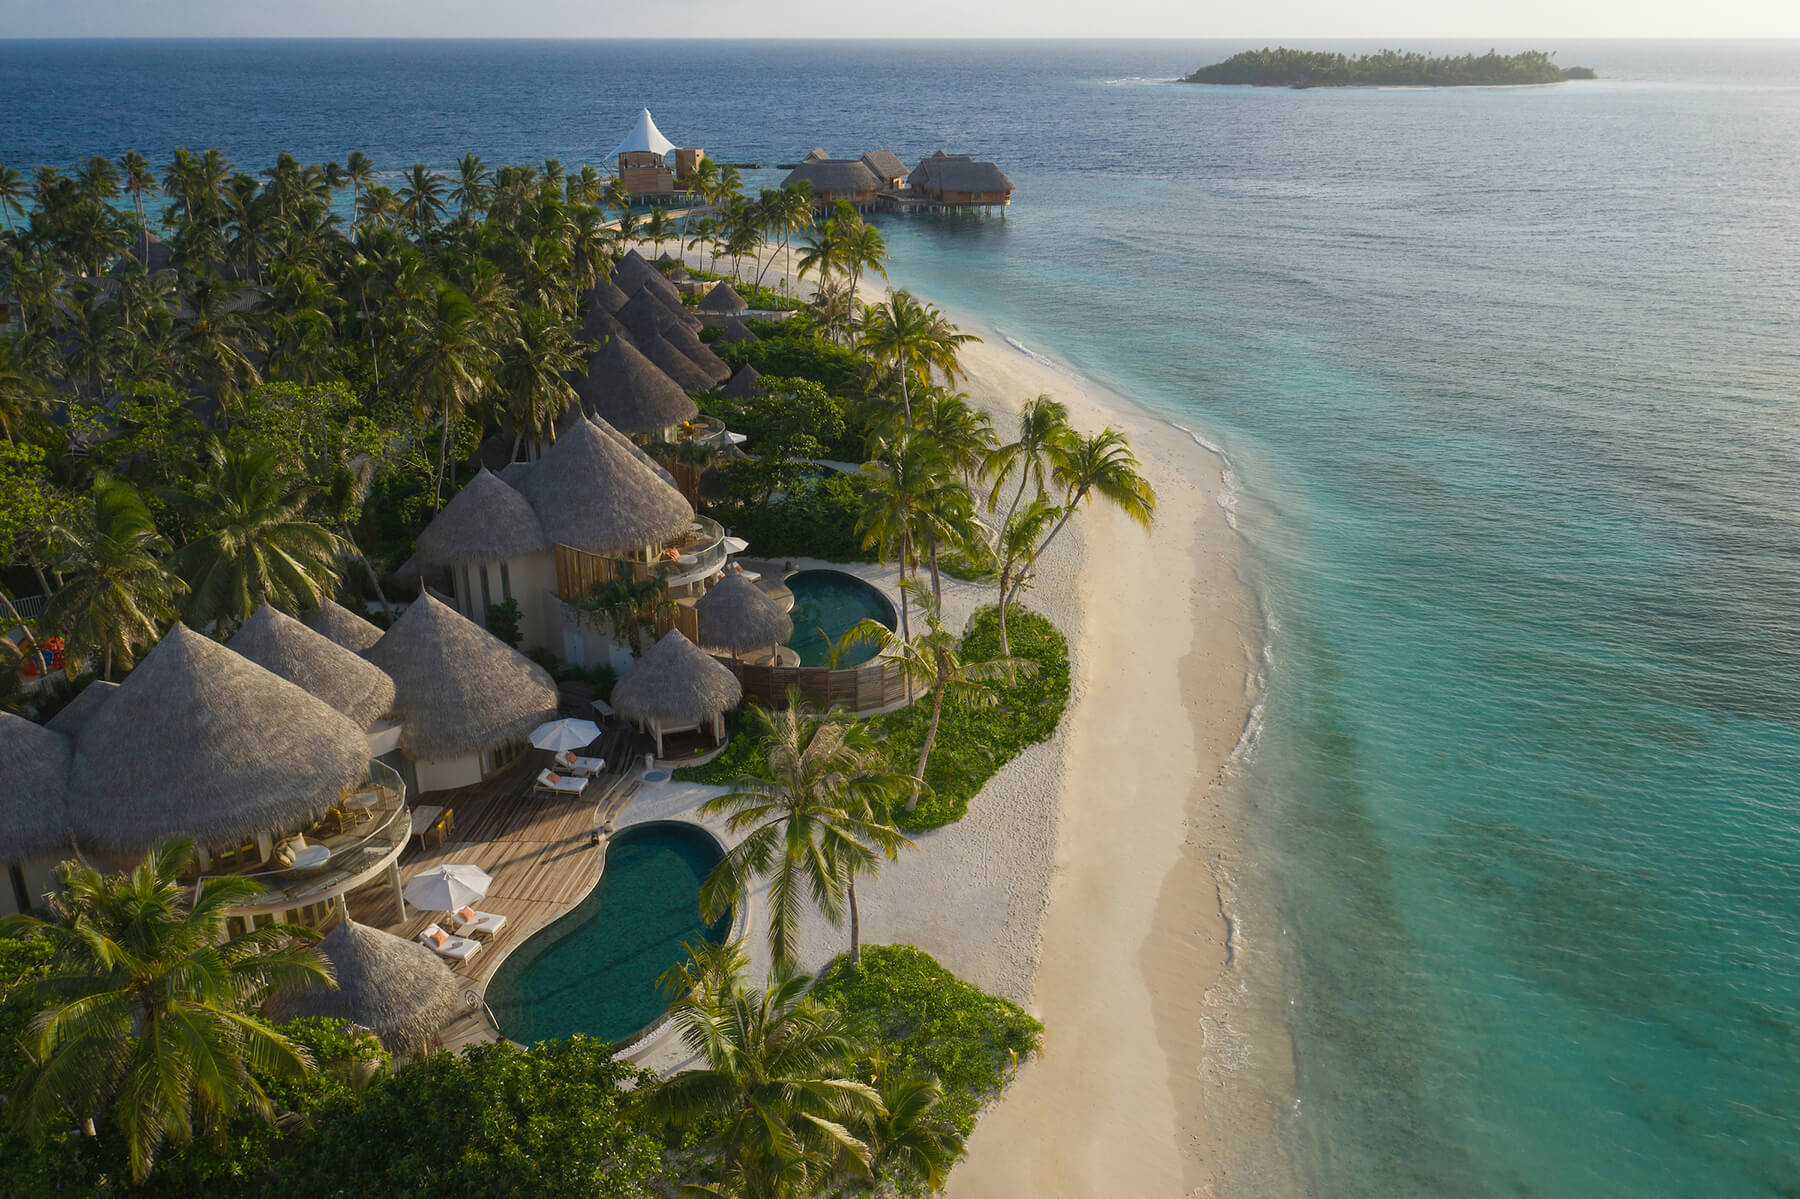 Luxury holiday accommodation on a private island